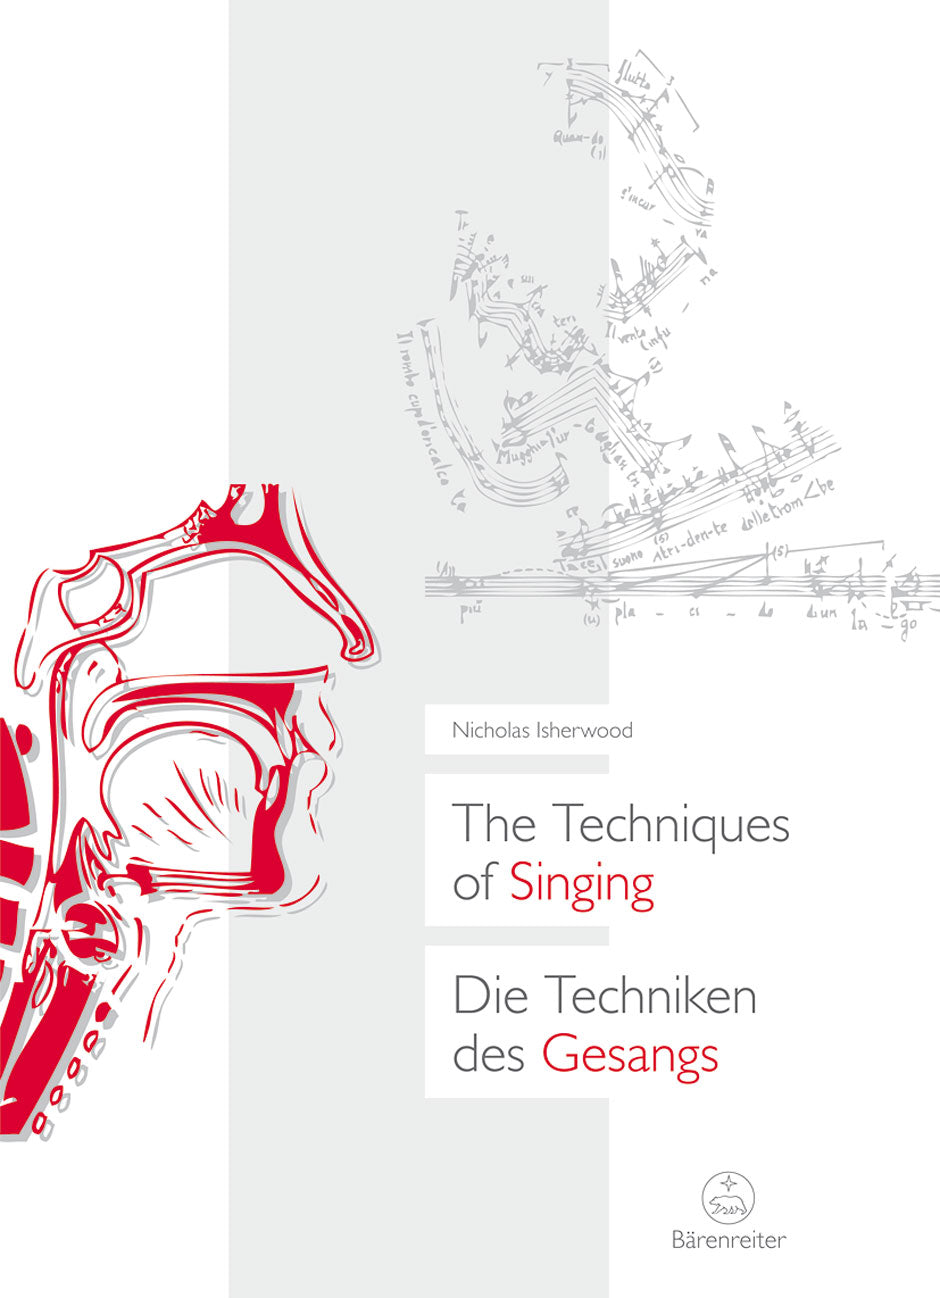 The Techniques of Singing